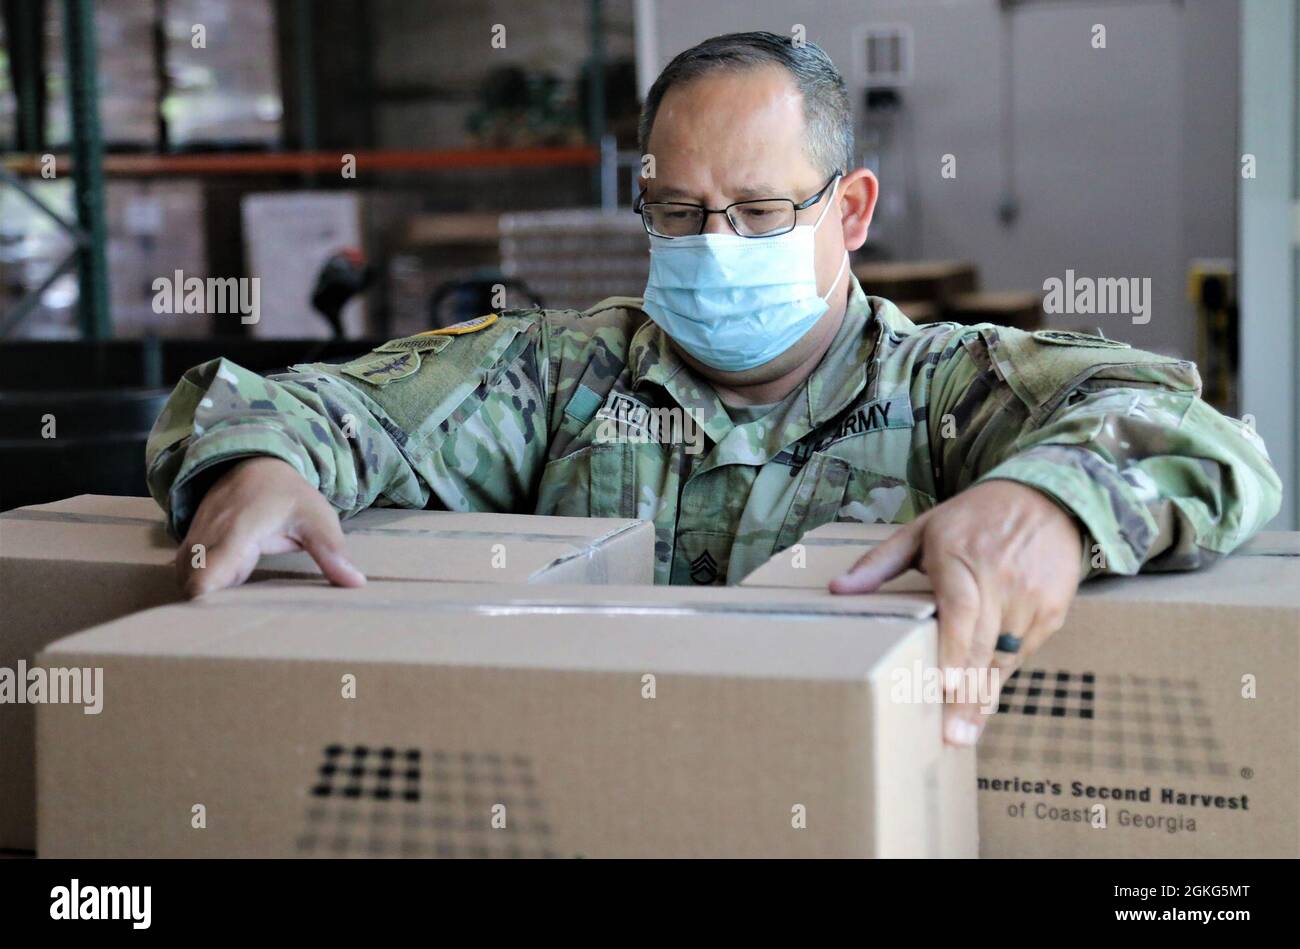 U.S. Army Staff Sgt. David Gurule, a parachute rigger with the Marietta-based 165th Quartermaster Company, 781st Troop Command Battalion, 78th Troop Command, Georgia Army National Guard stacks a box of food April 14, 2021, at America’s Second Harvest of Coastal Georgia food bank in Savannah, Georgia. Georgia Guardsmen provided support to food banks across the state to help citizens in need during the COVID-19 pandemic. Stock Photo